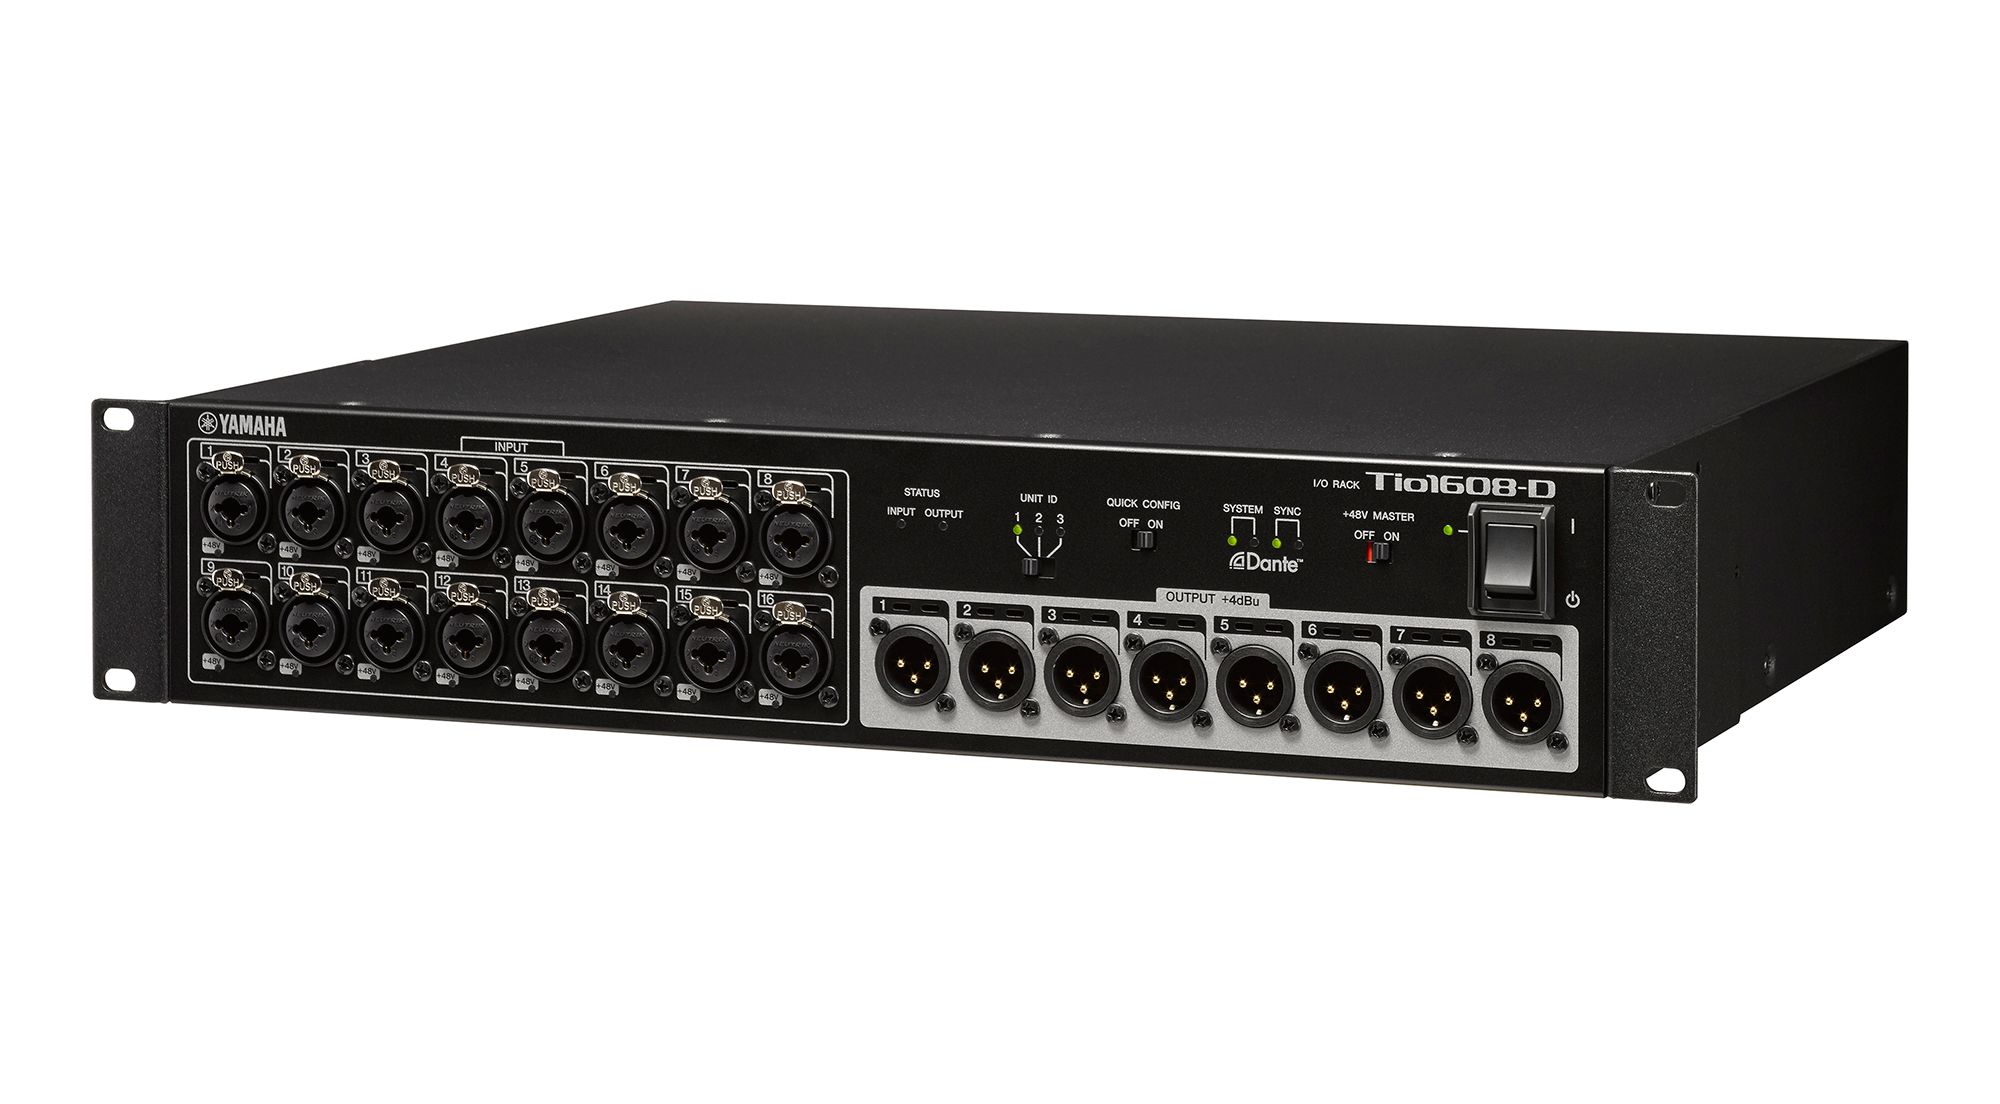 Tio1608-D - Overview - Interfaces - Professional Audio - Products 